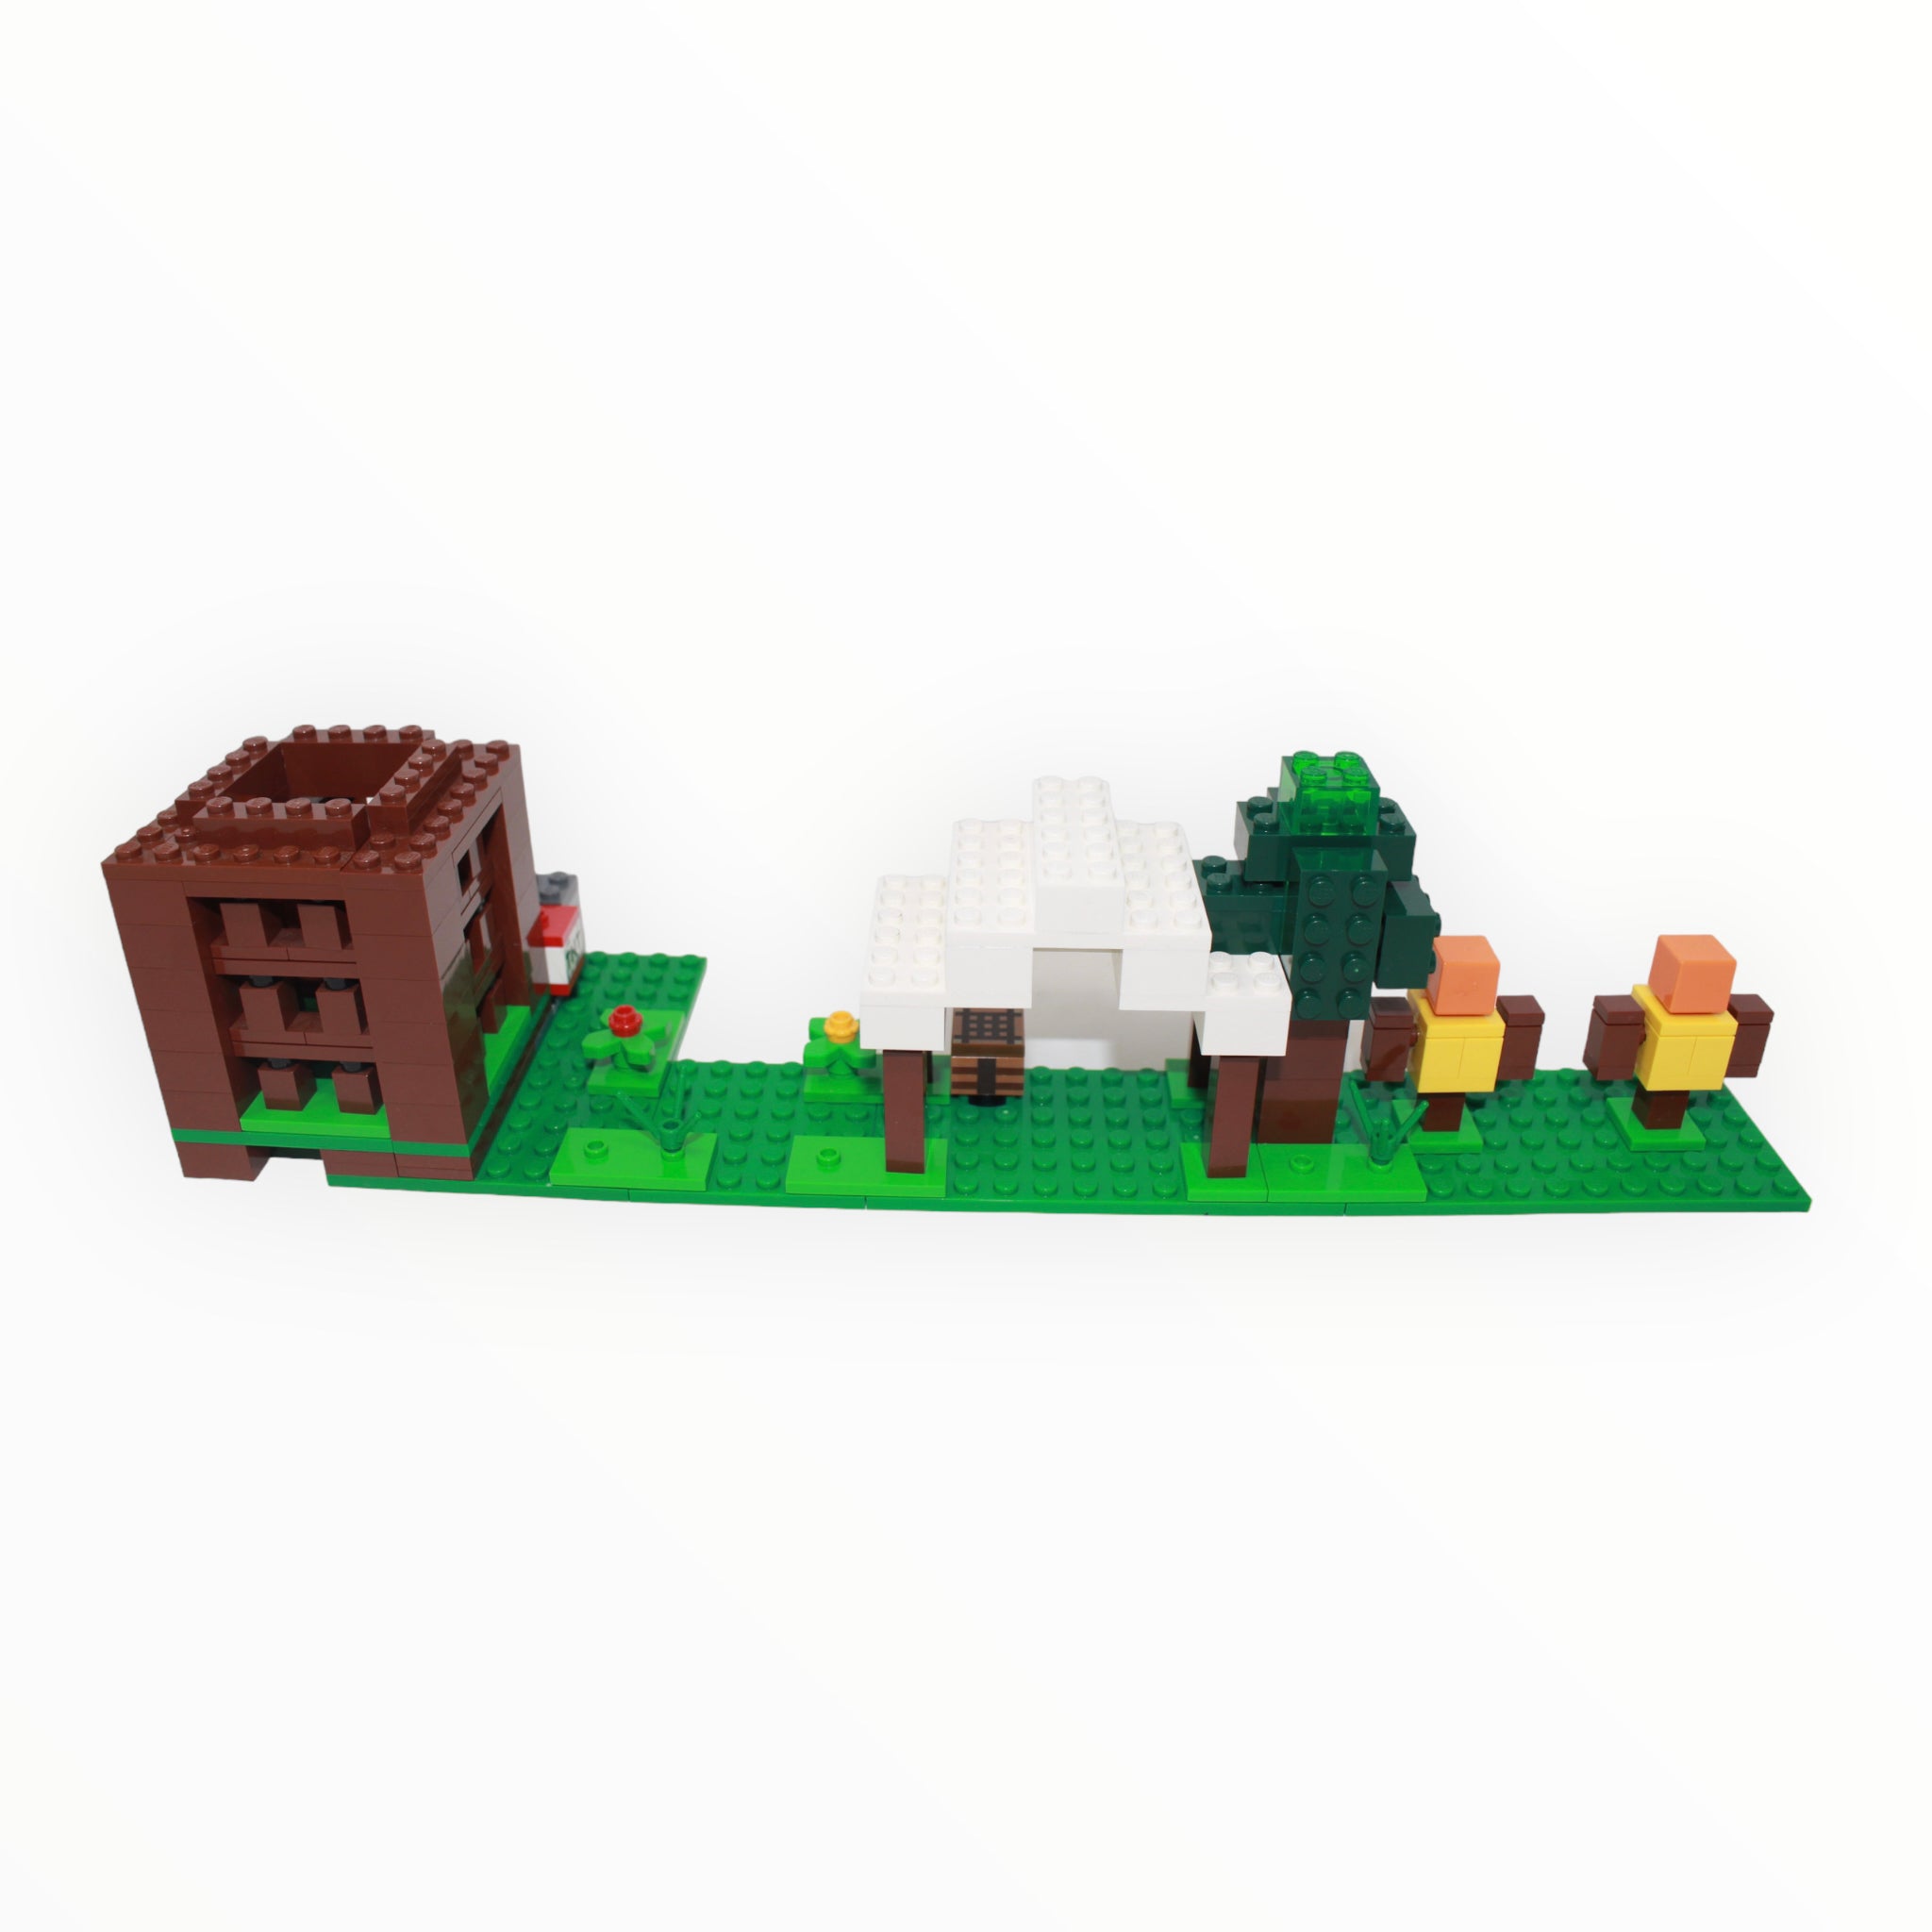 Used Set 21159 Minecraft The Pillager Outpost